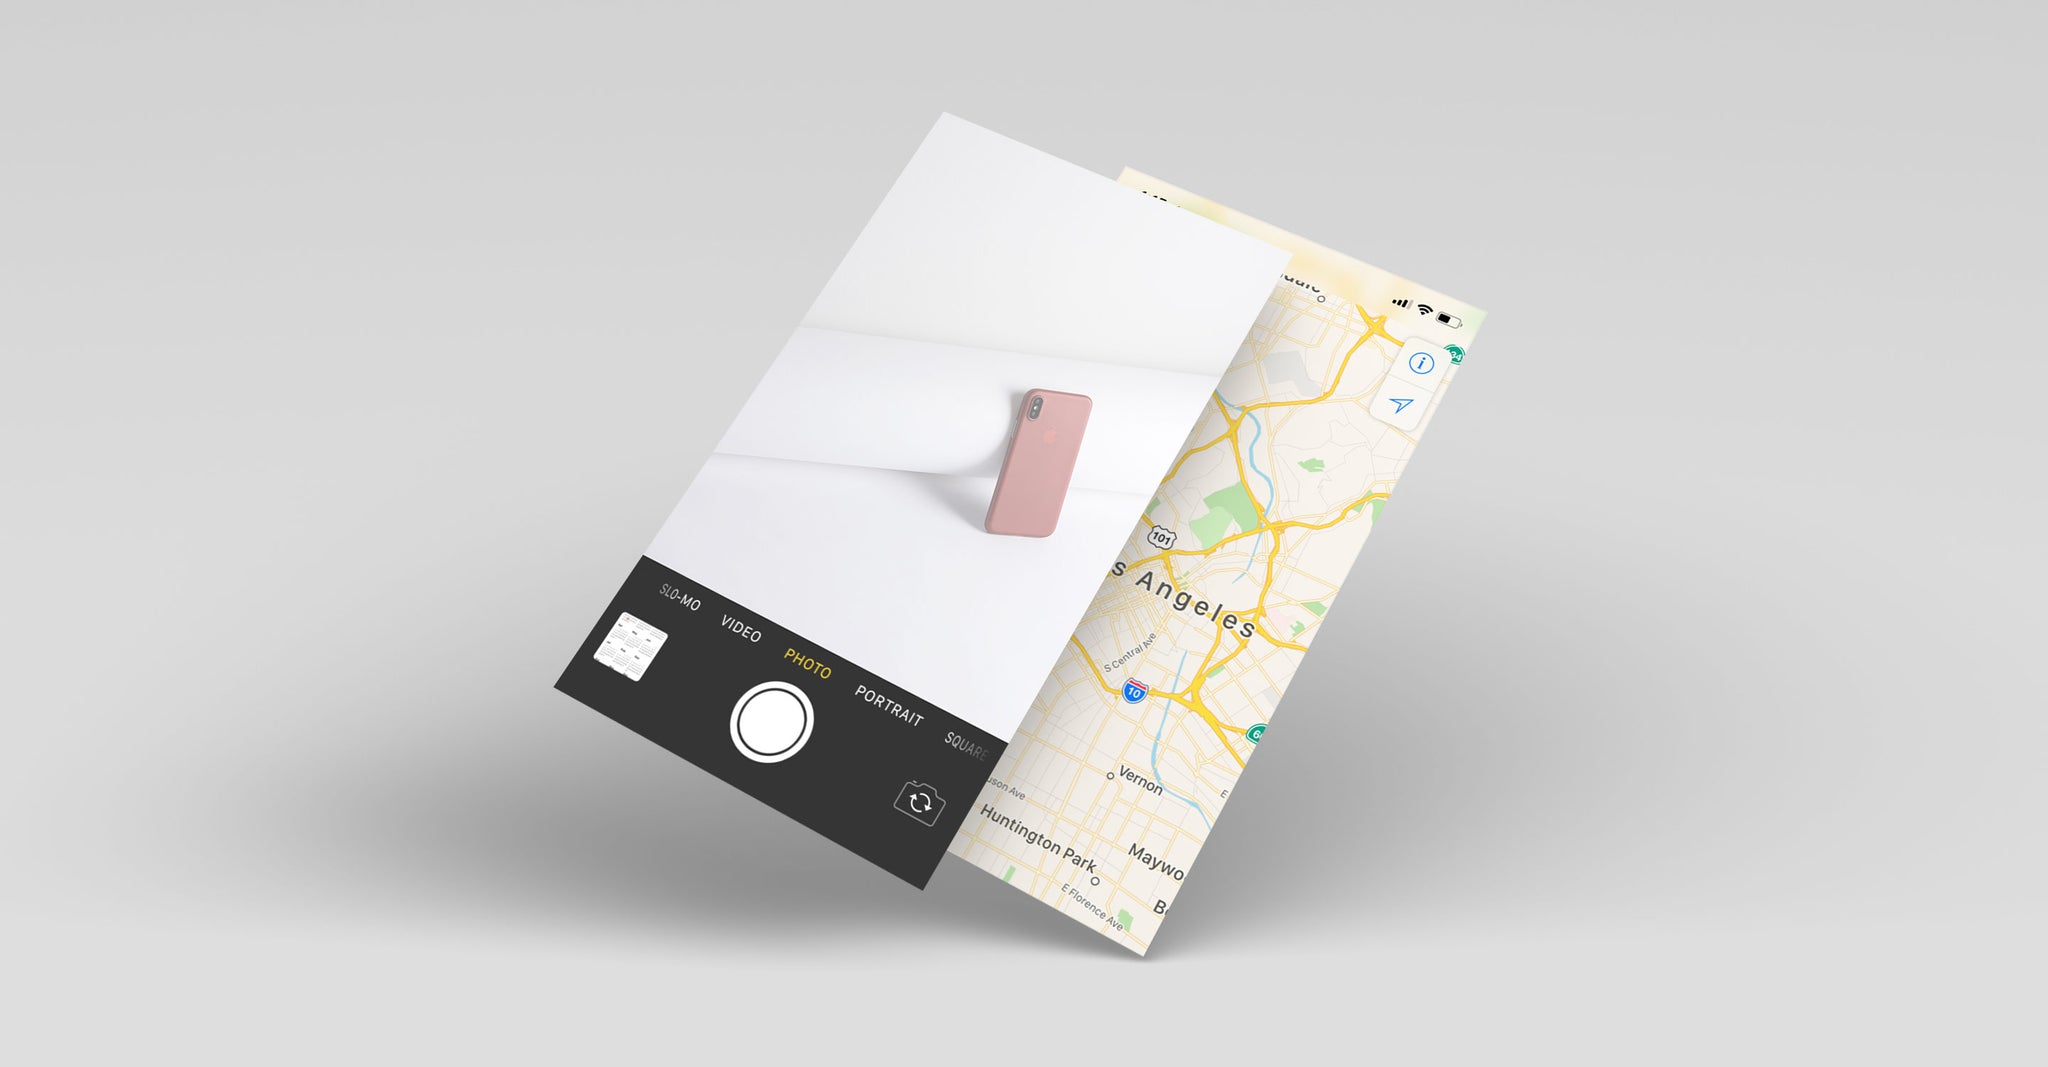 Use your iPhone as a camera and as a map